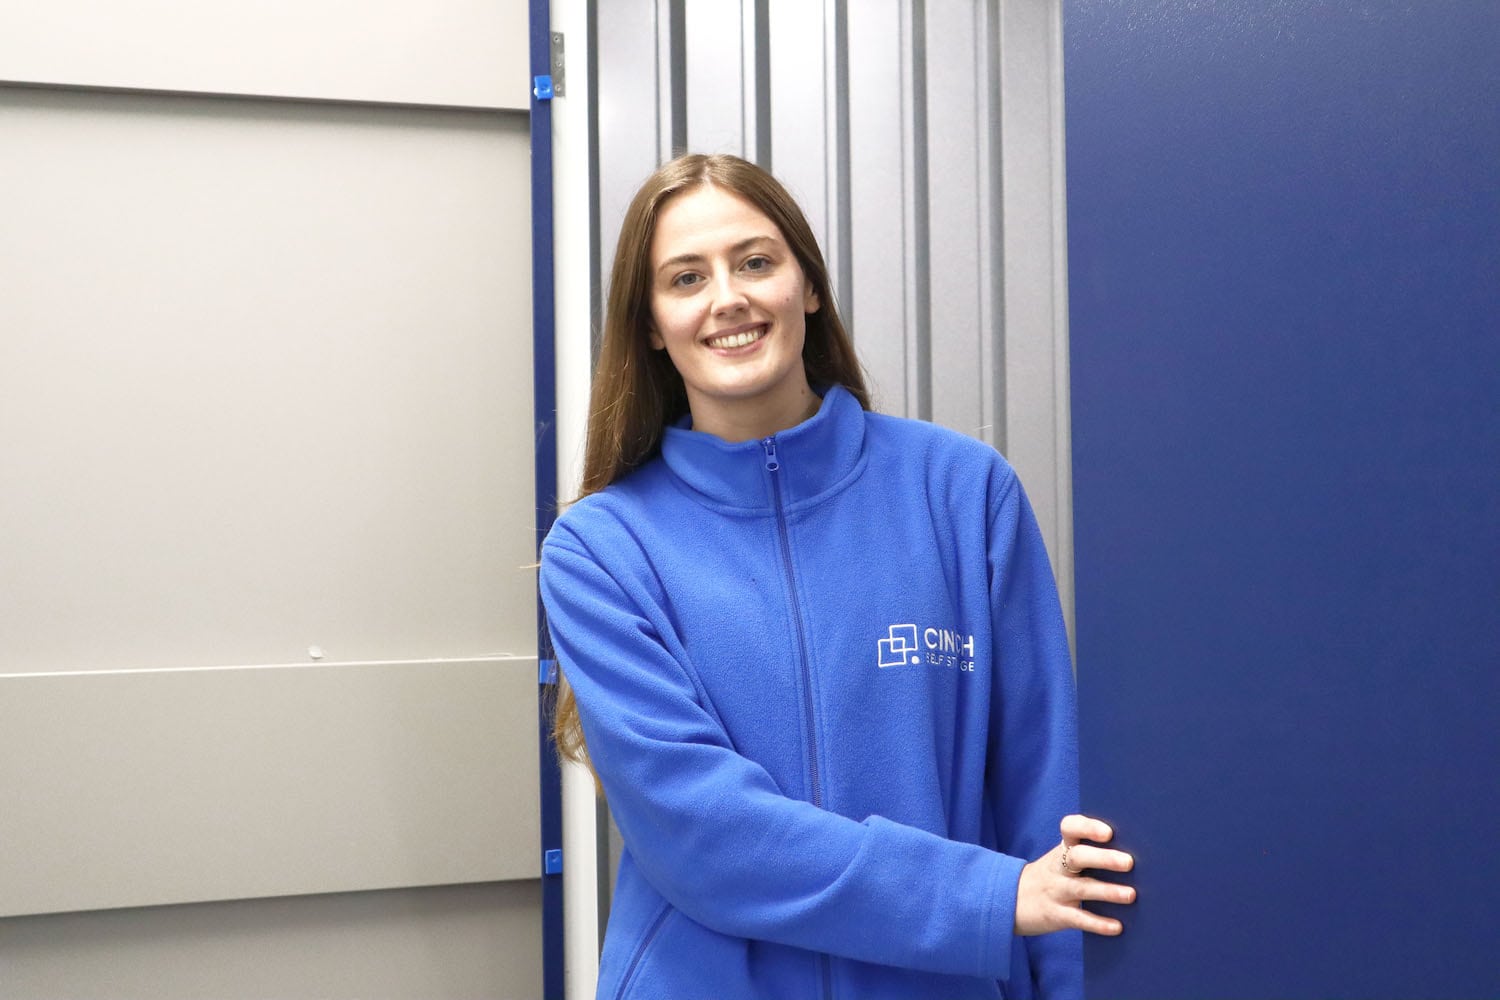 How to pack a self storage unit. Image shows a Cinch Self Storage employee standing in the doorway of a storage unit wearing a blue Cinch Self Storage fleece.